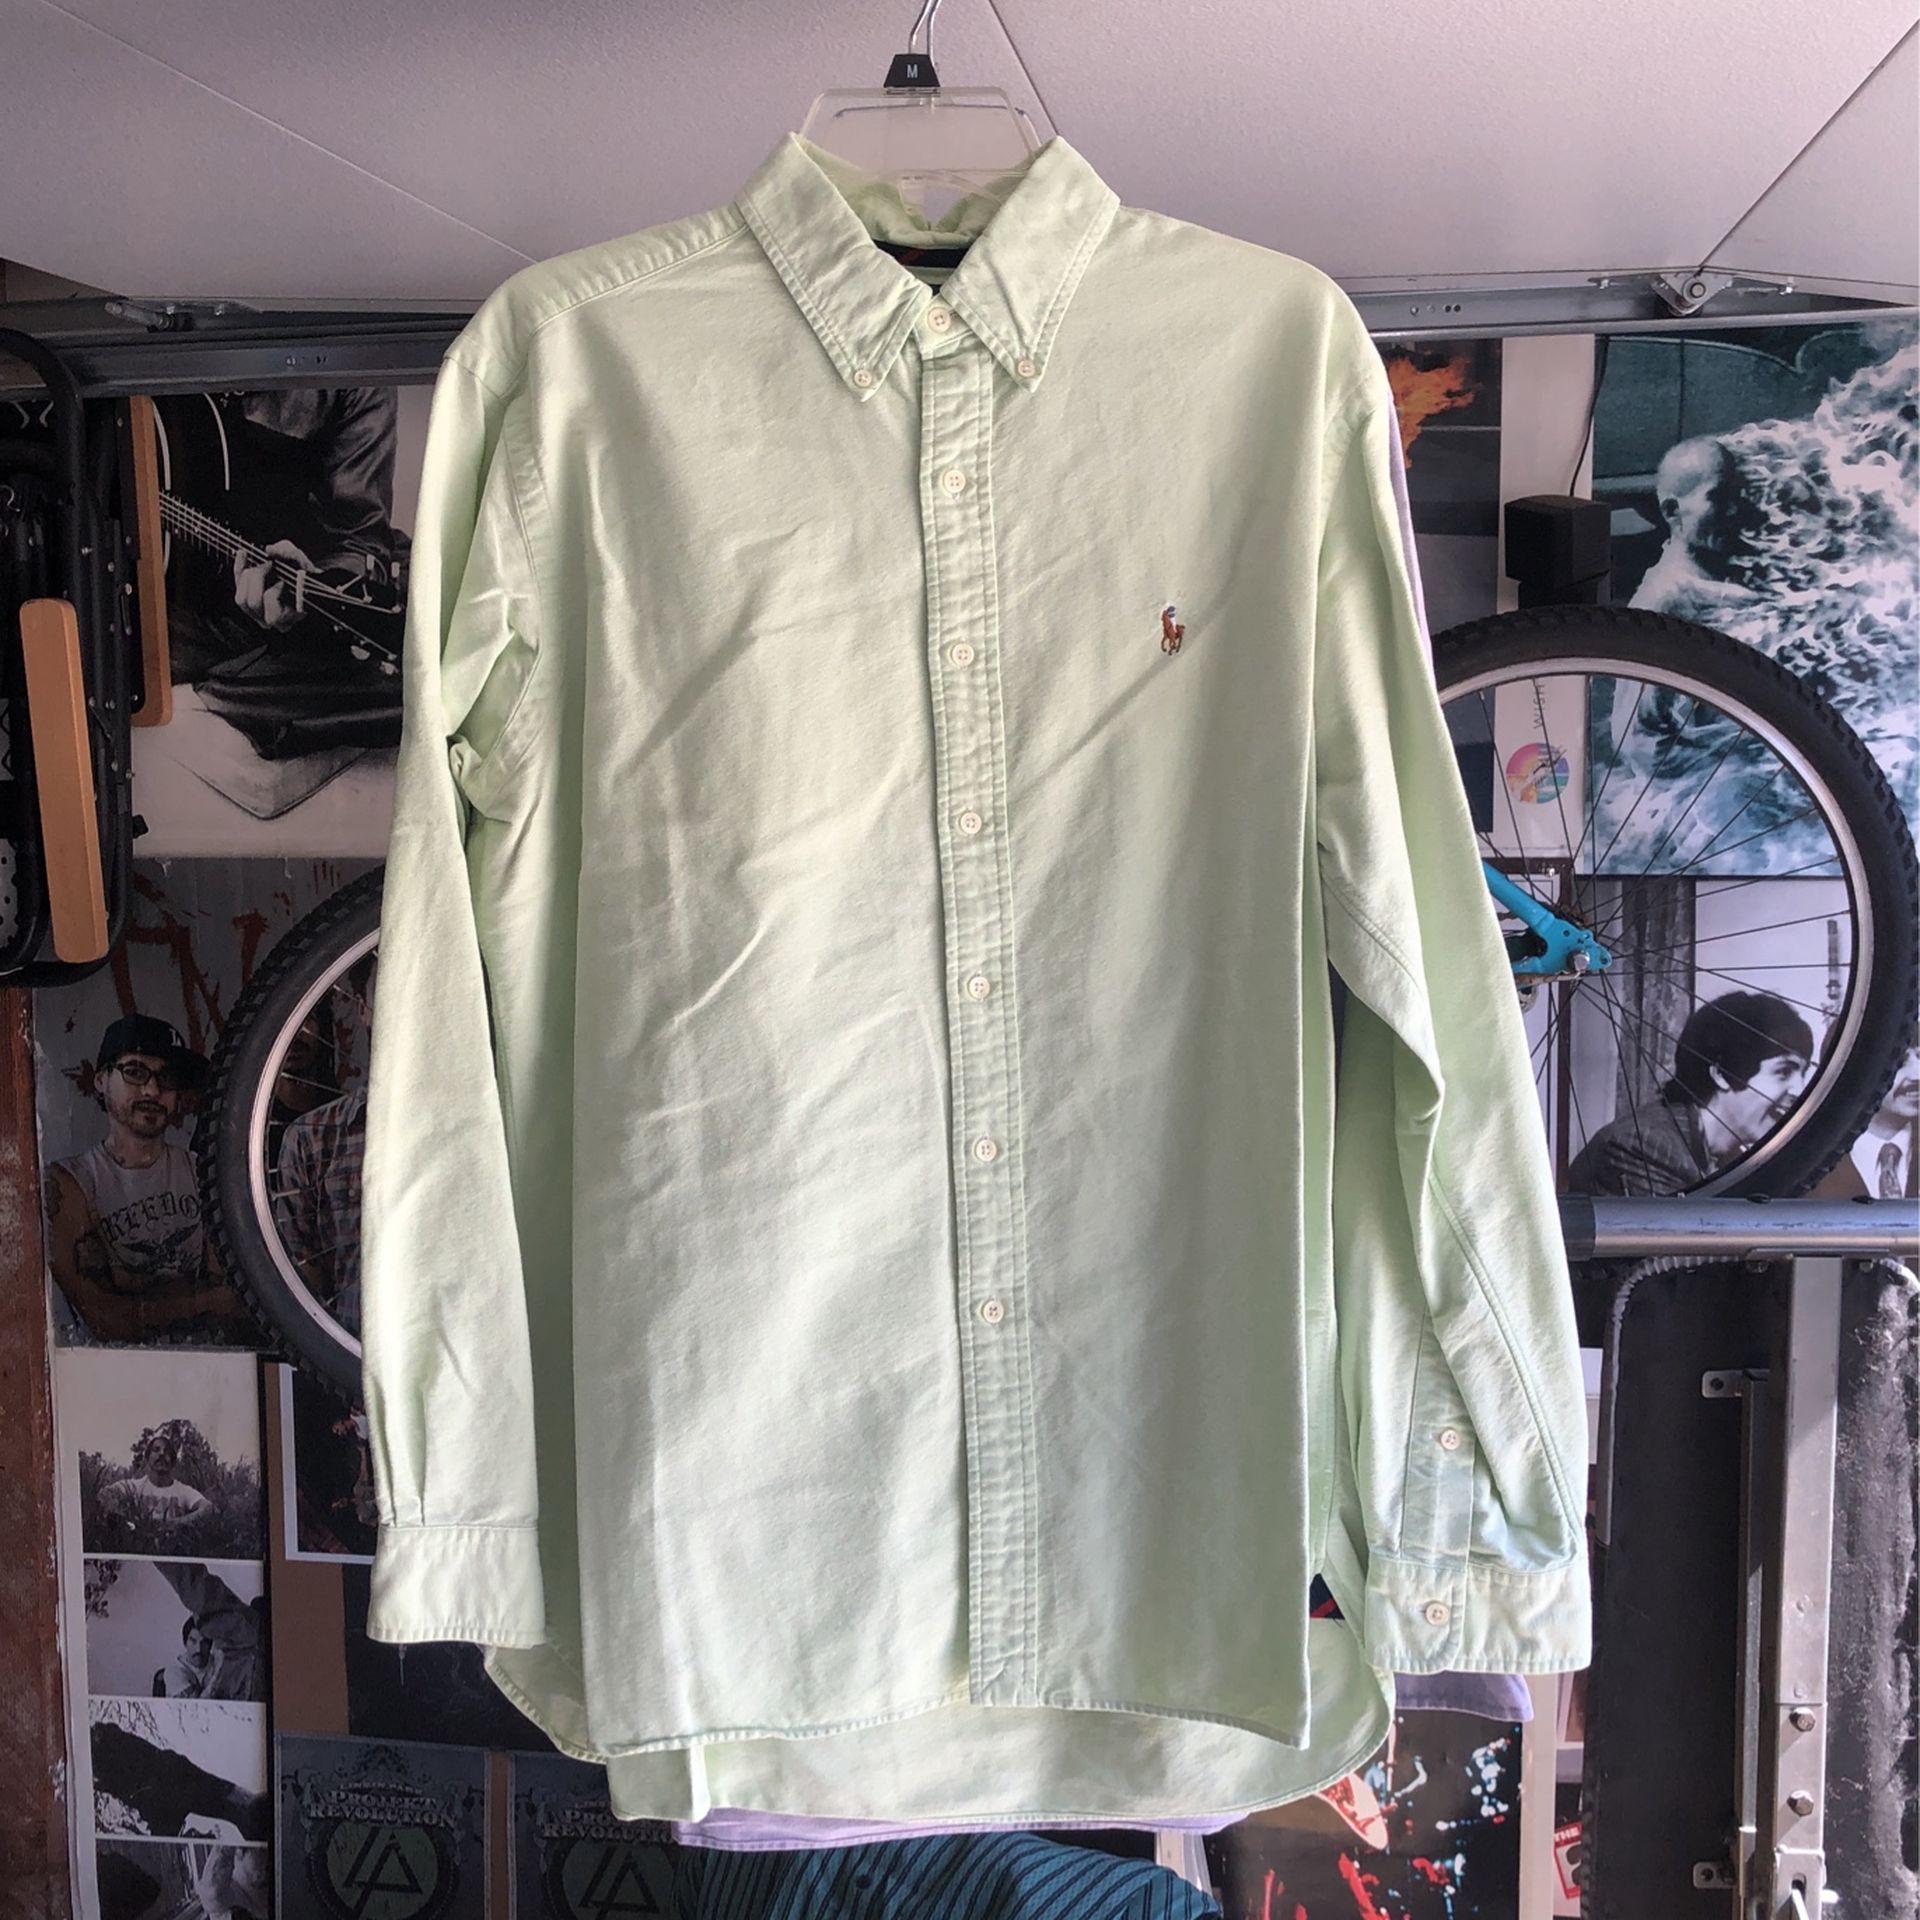 Mens Polo/Ralph Lauren - Long-Sleeve Button Up - Size Large - Classic Fit - Light Green